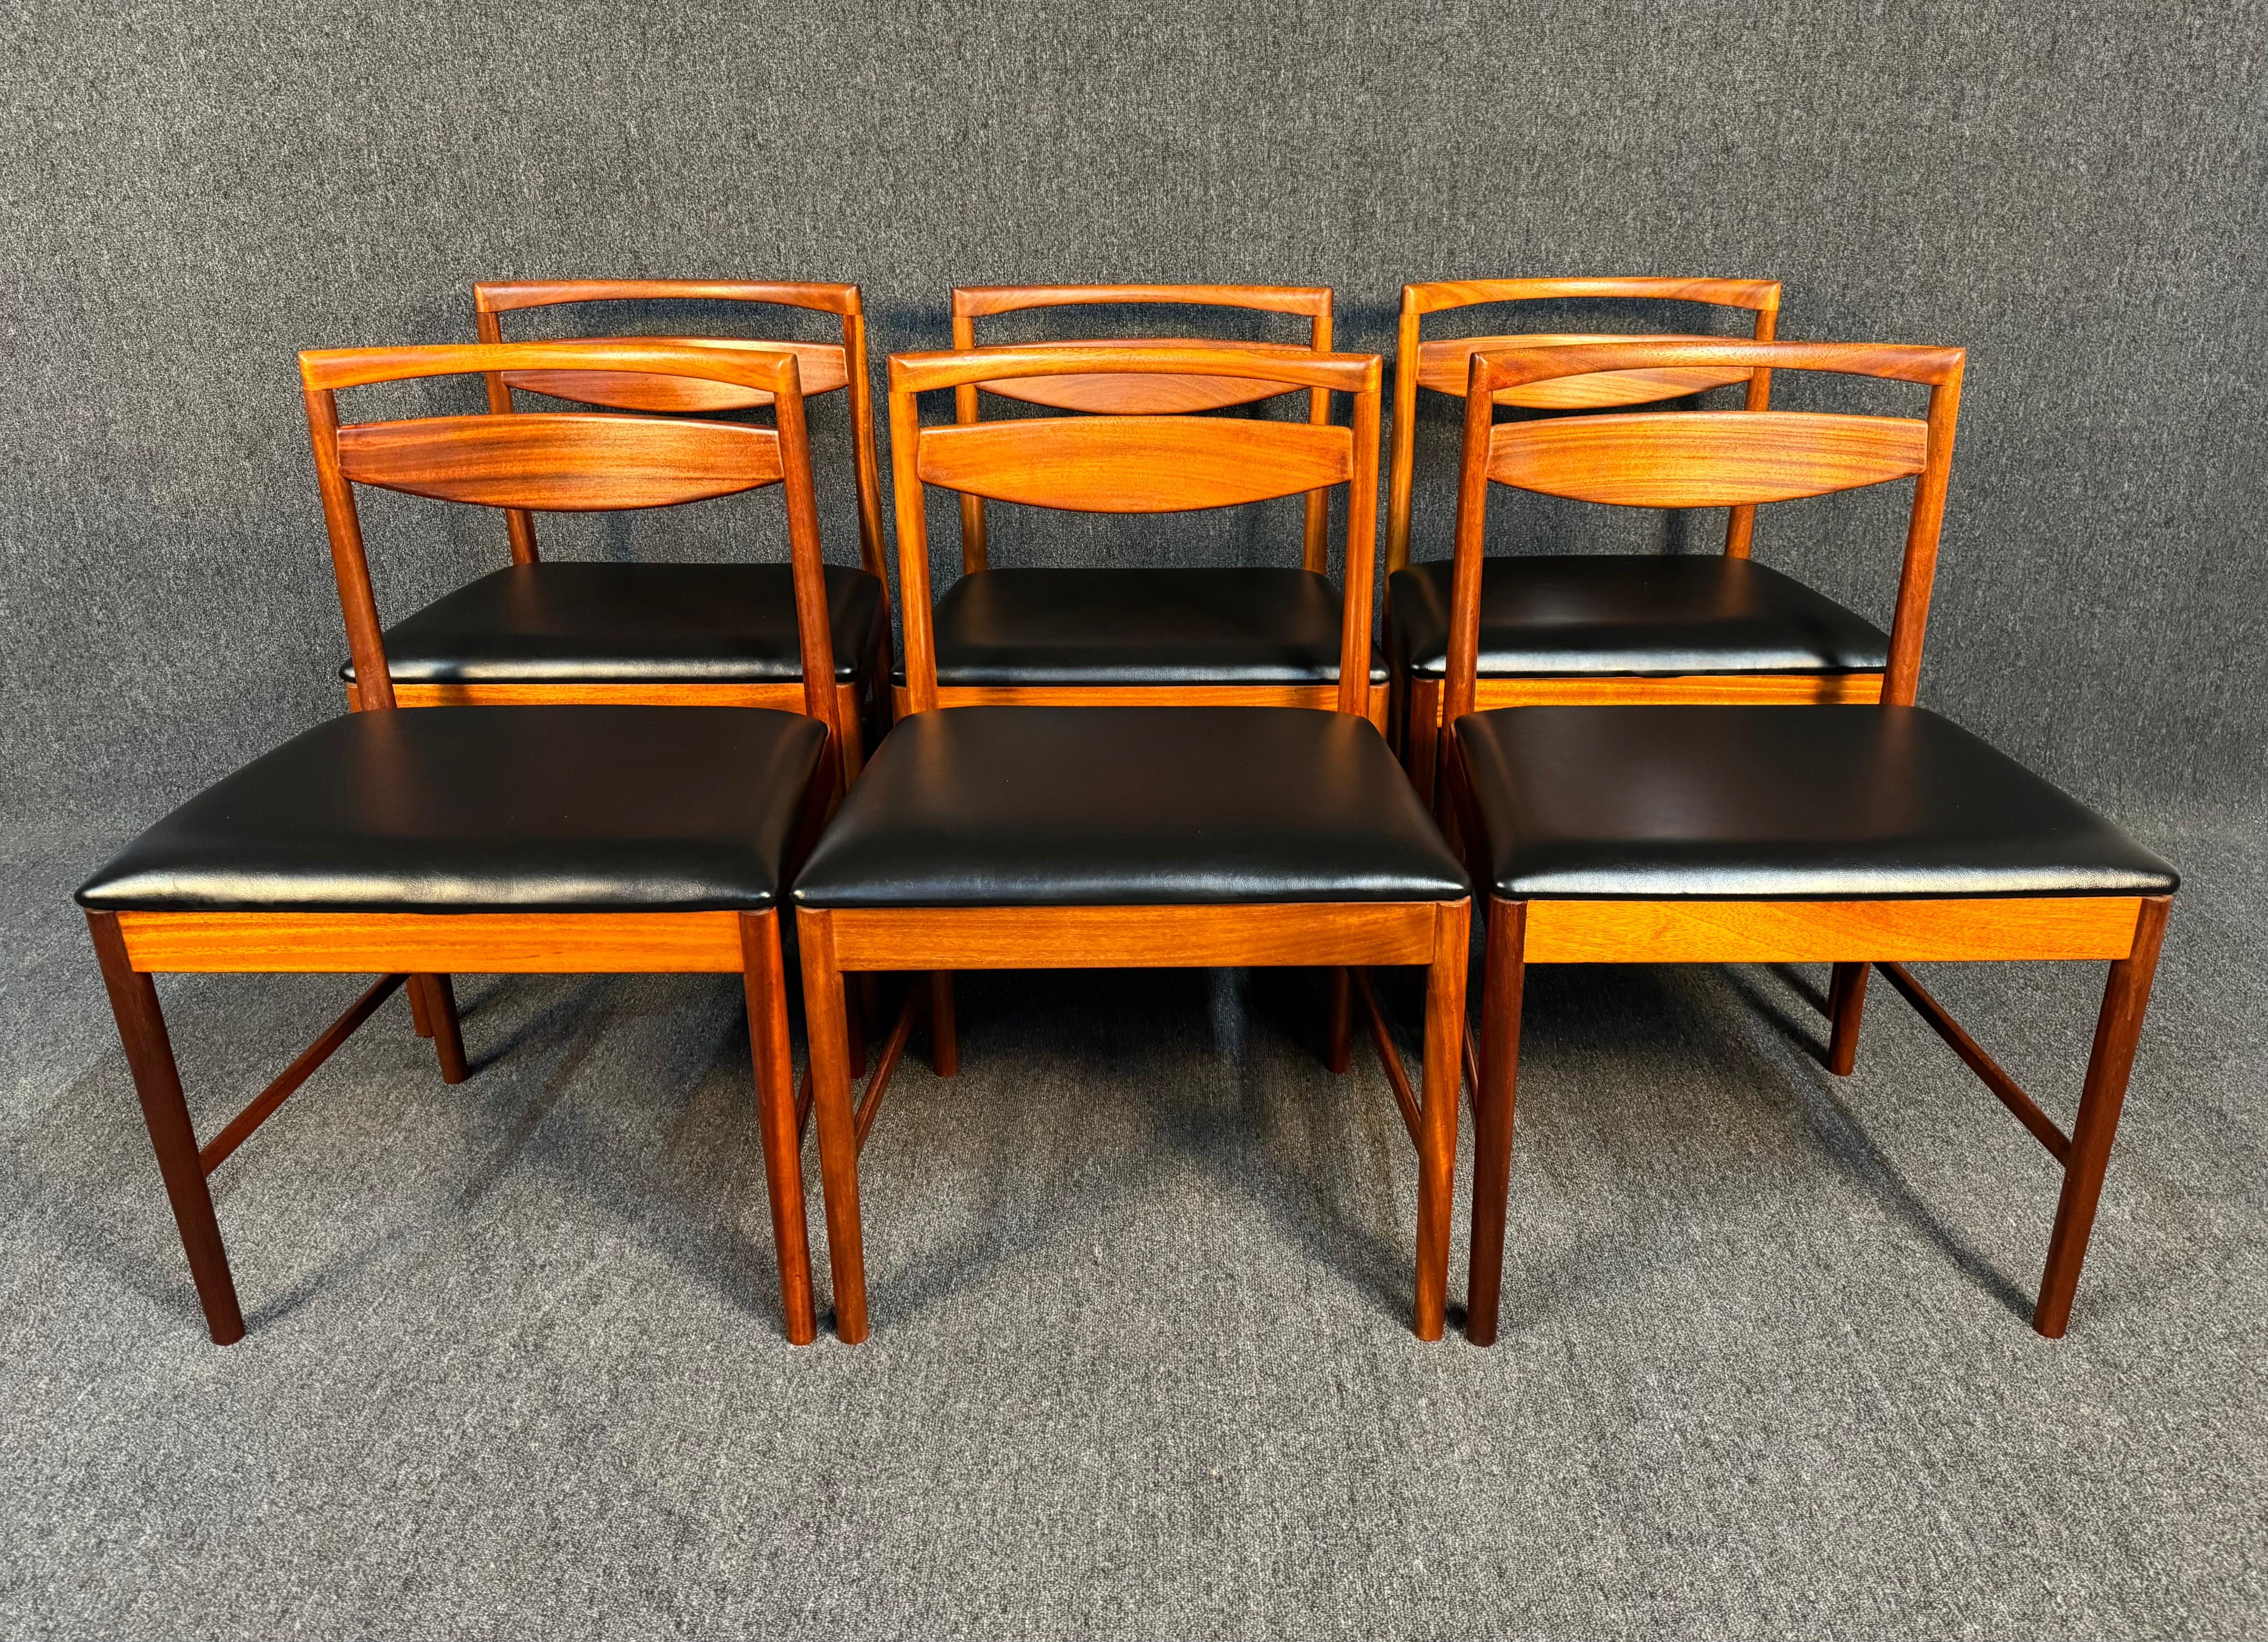 Set of 6 Vintage British Mid Century Modern Mahogany Dining Chairs by McIntosh In Good Condition For Sale In San Marcos, CA